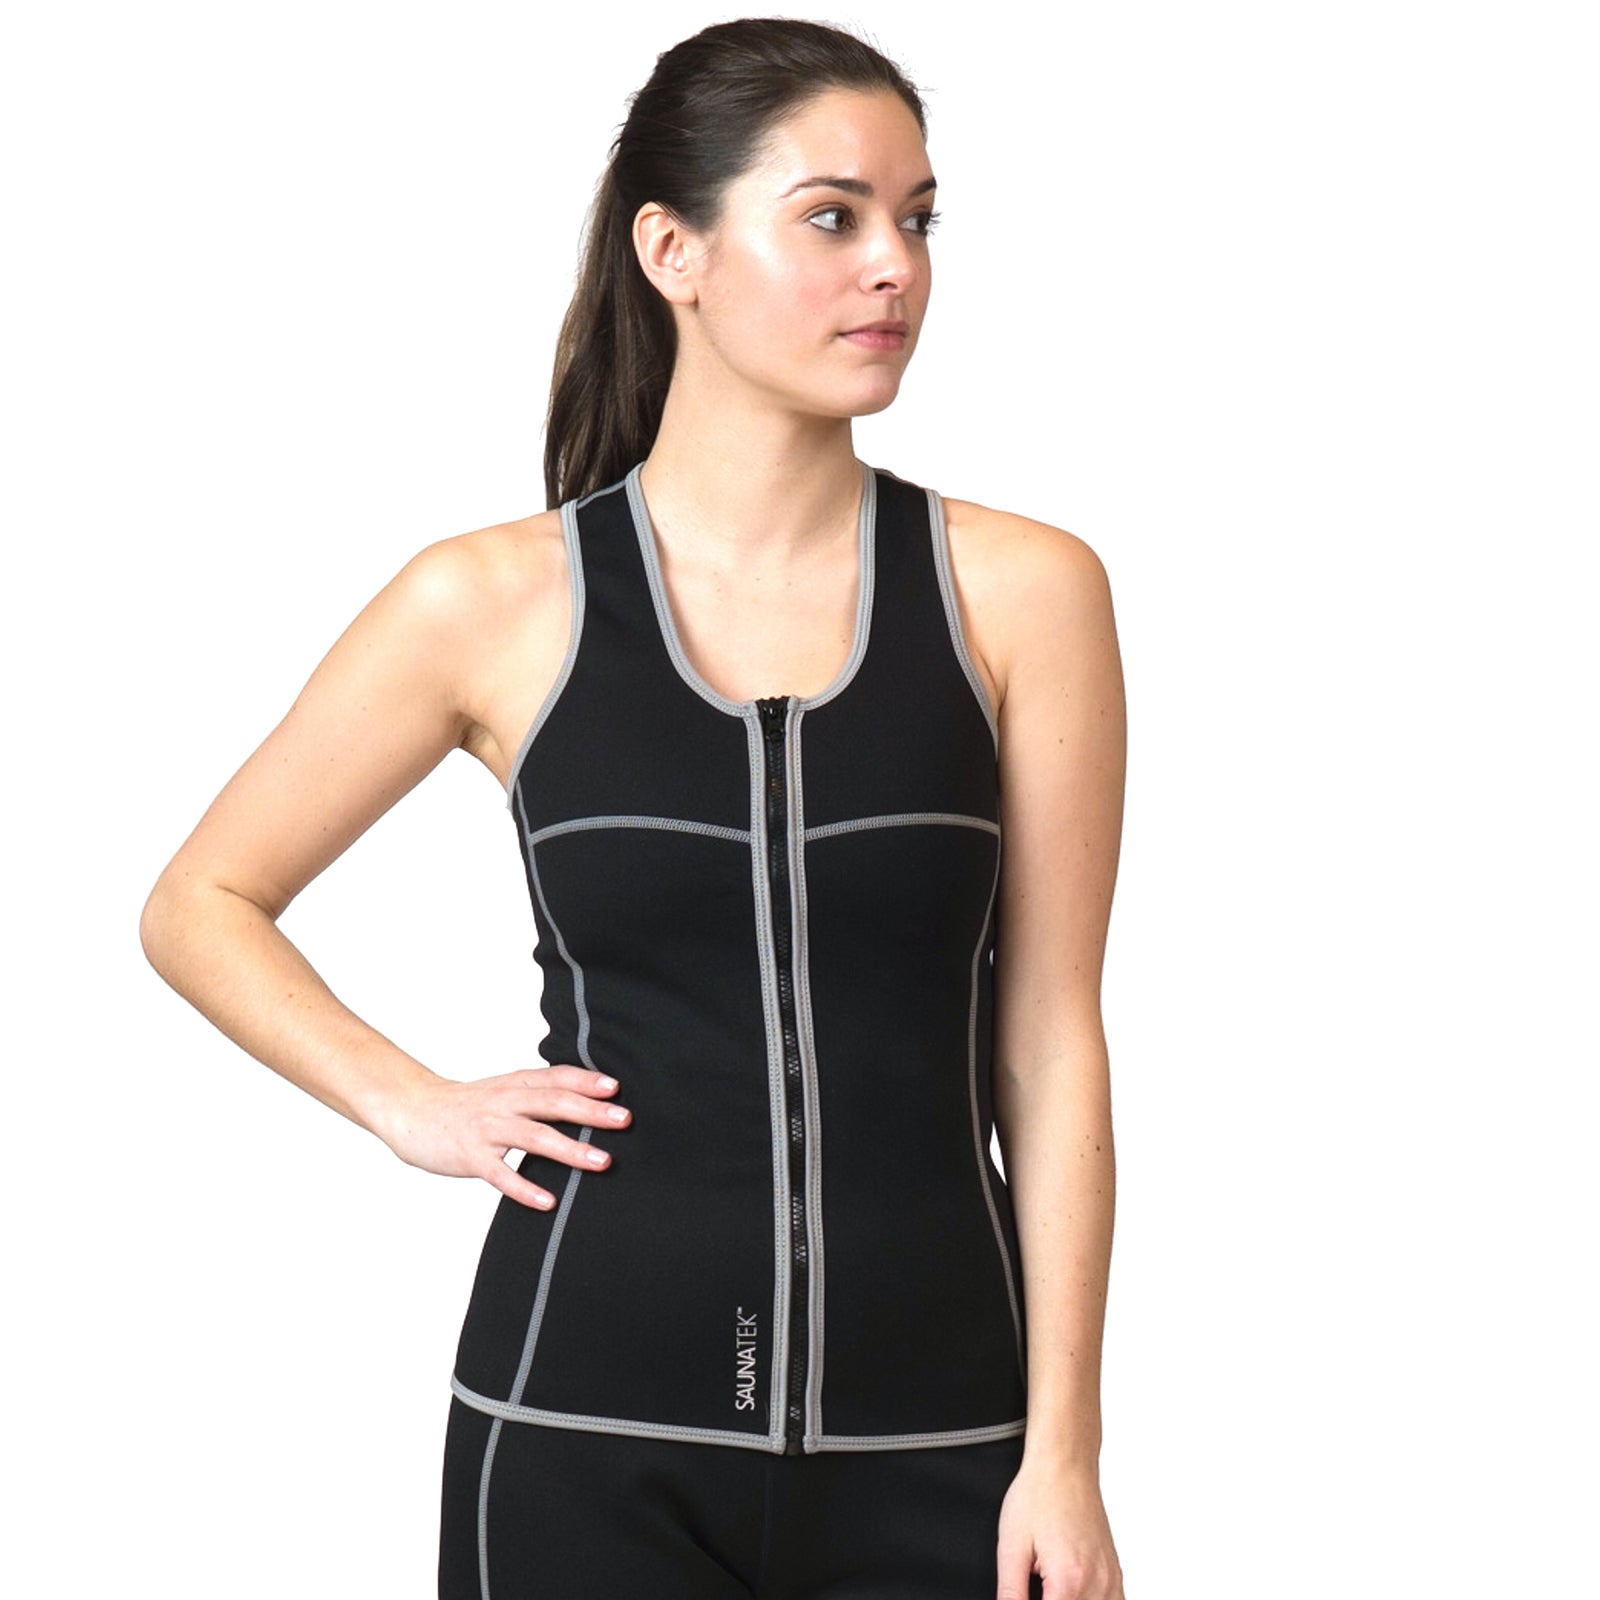 SaunaFX Women's Slimming Neoprene Sauna Vest with Microban Antimicrobial  Product Protection